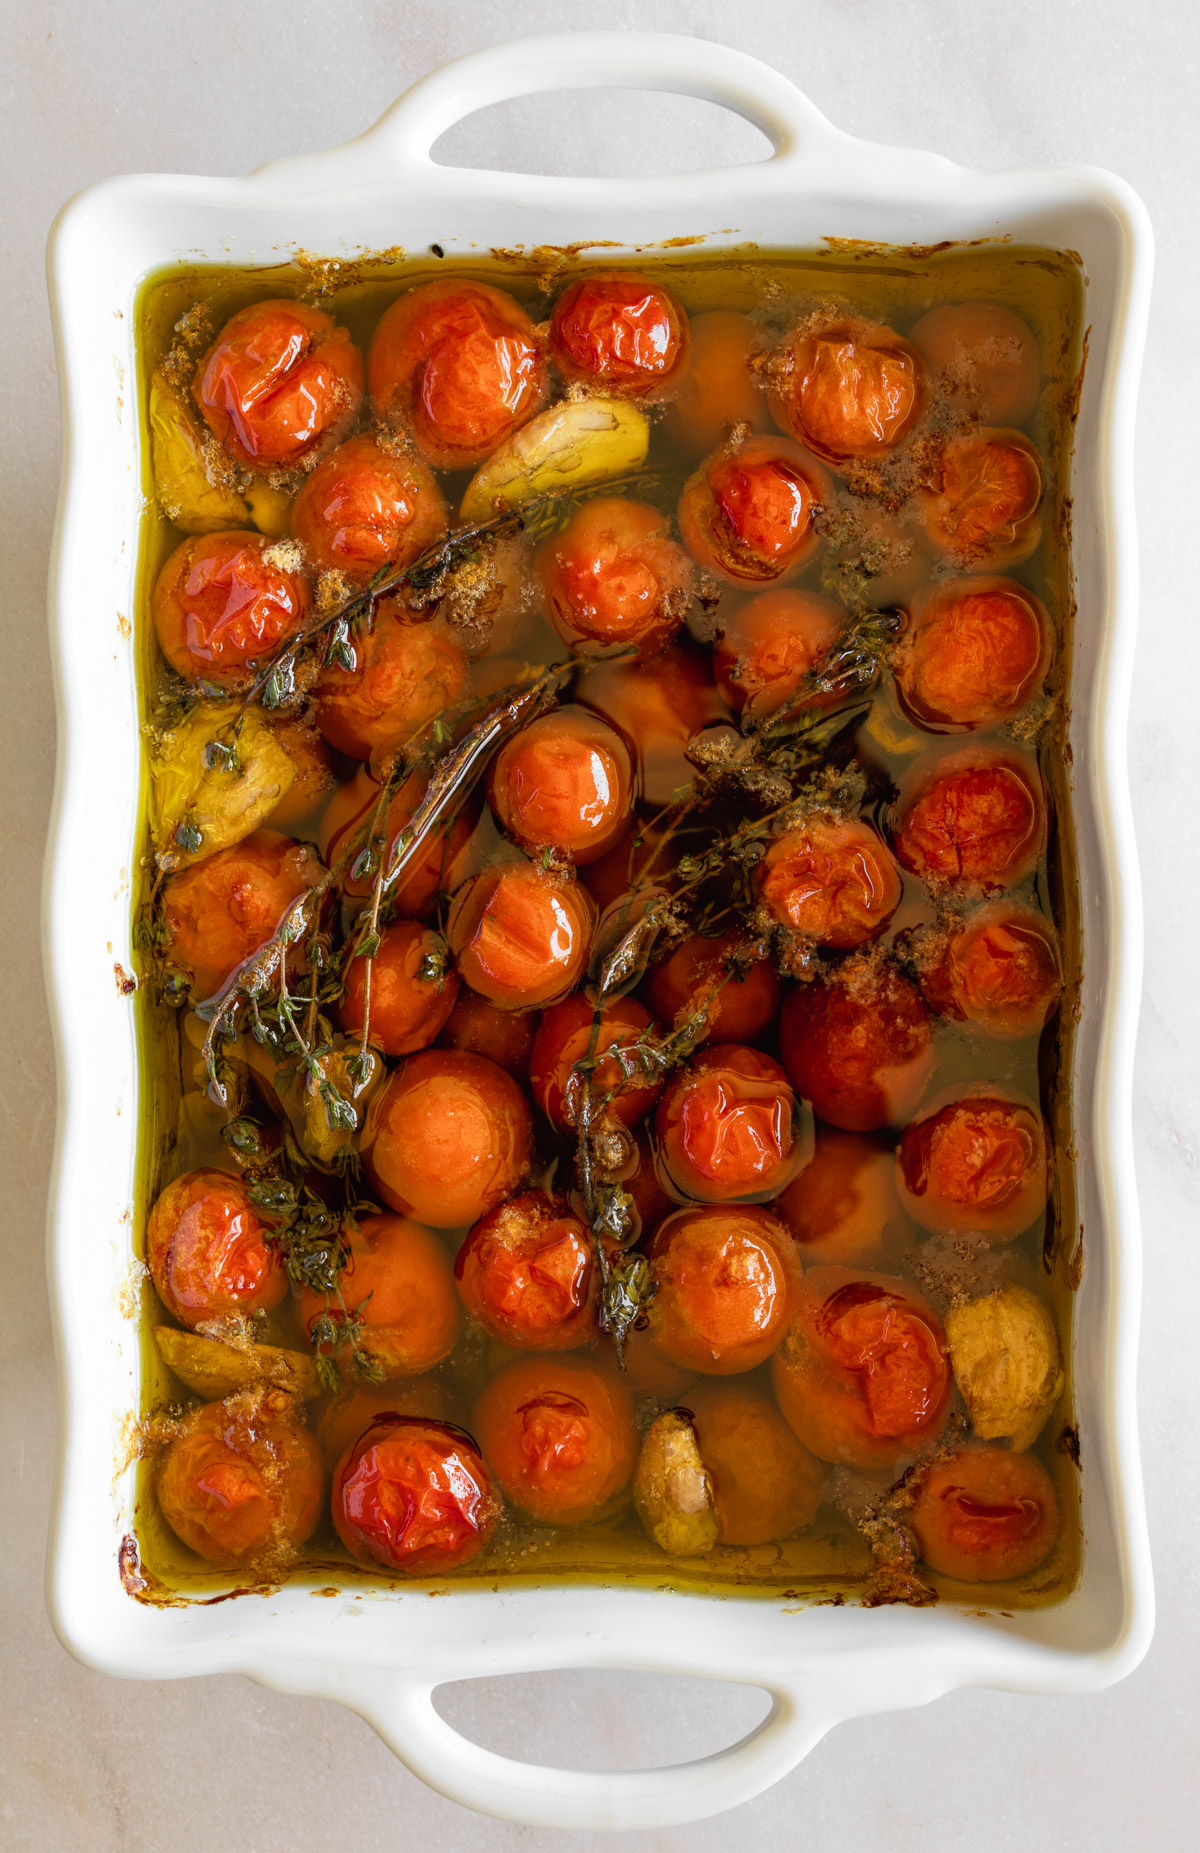 tomato confit in a baking dish after slow roasting for two and a half hours.